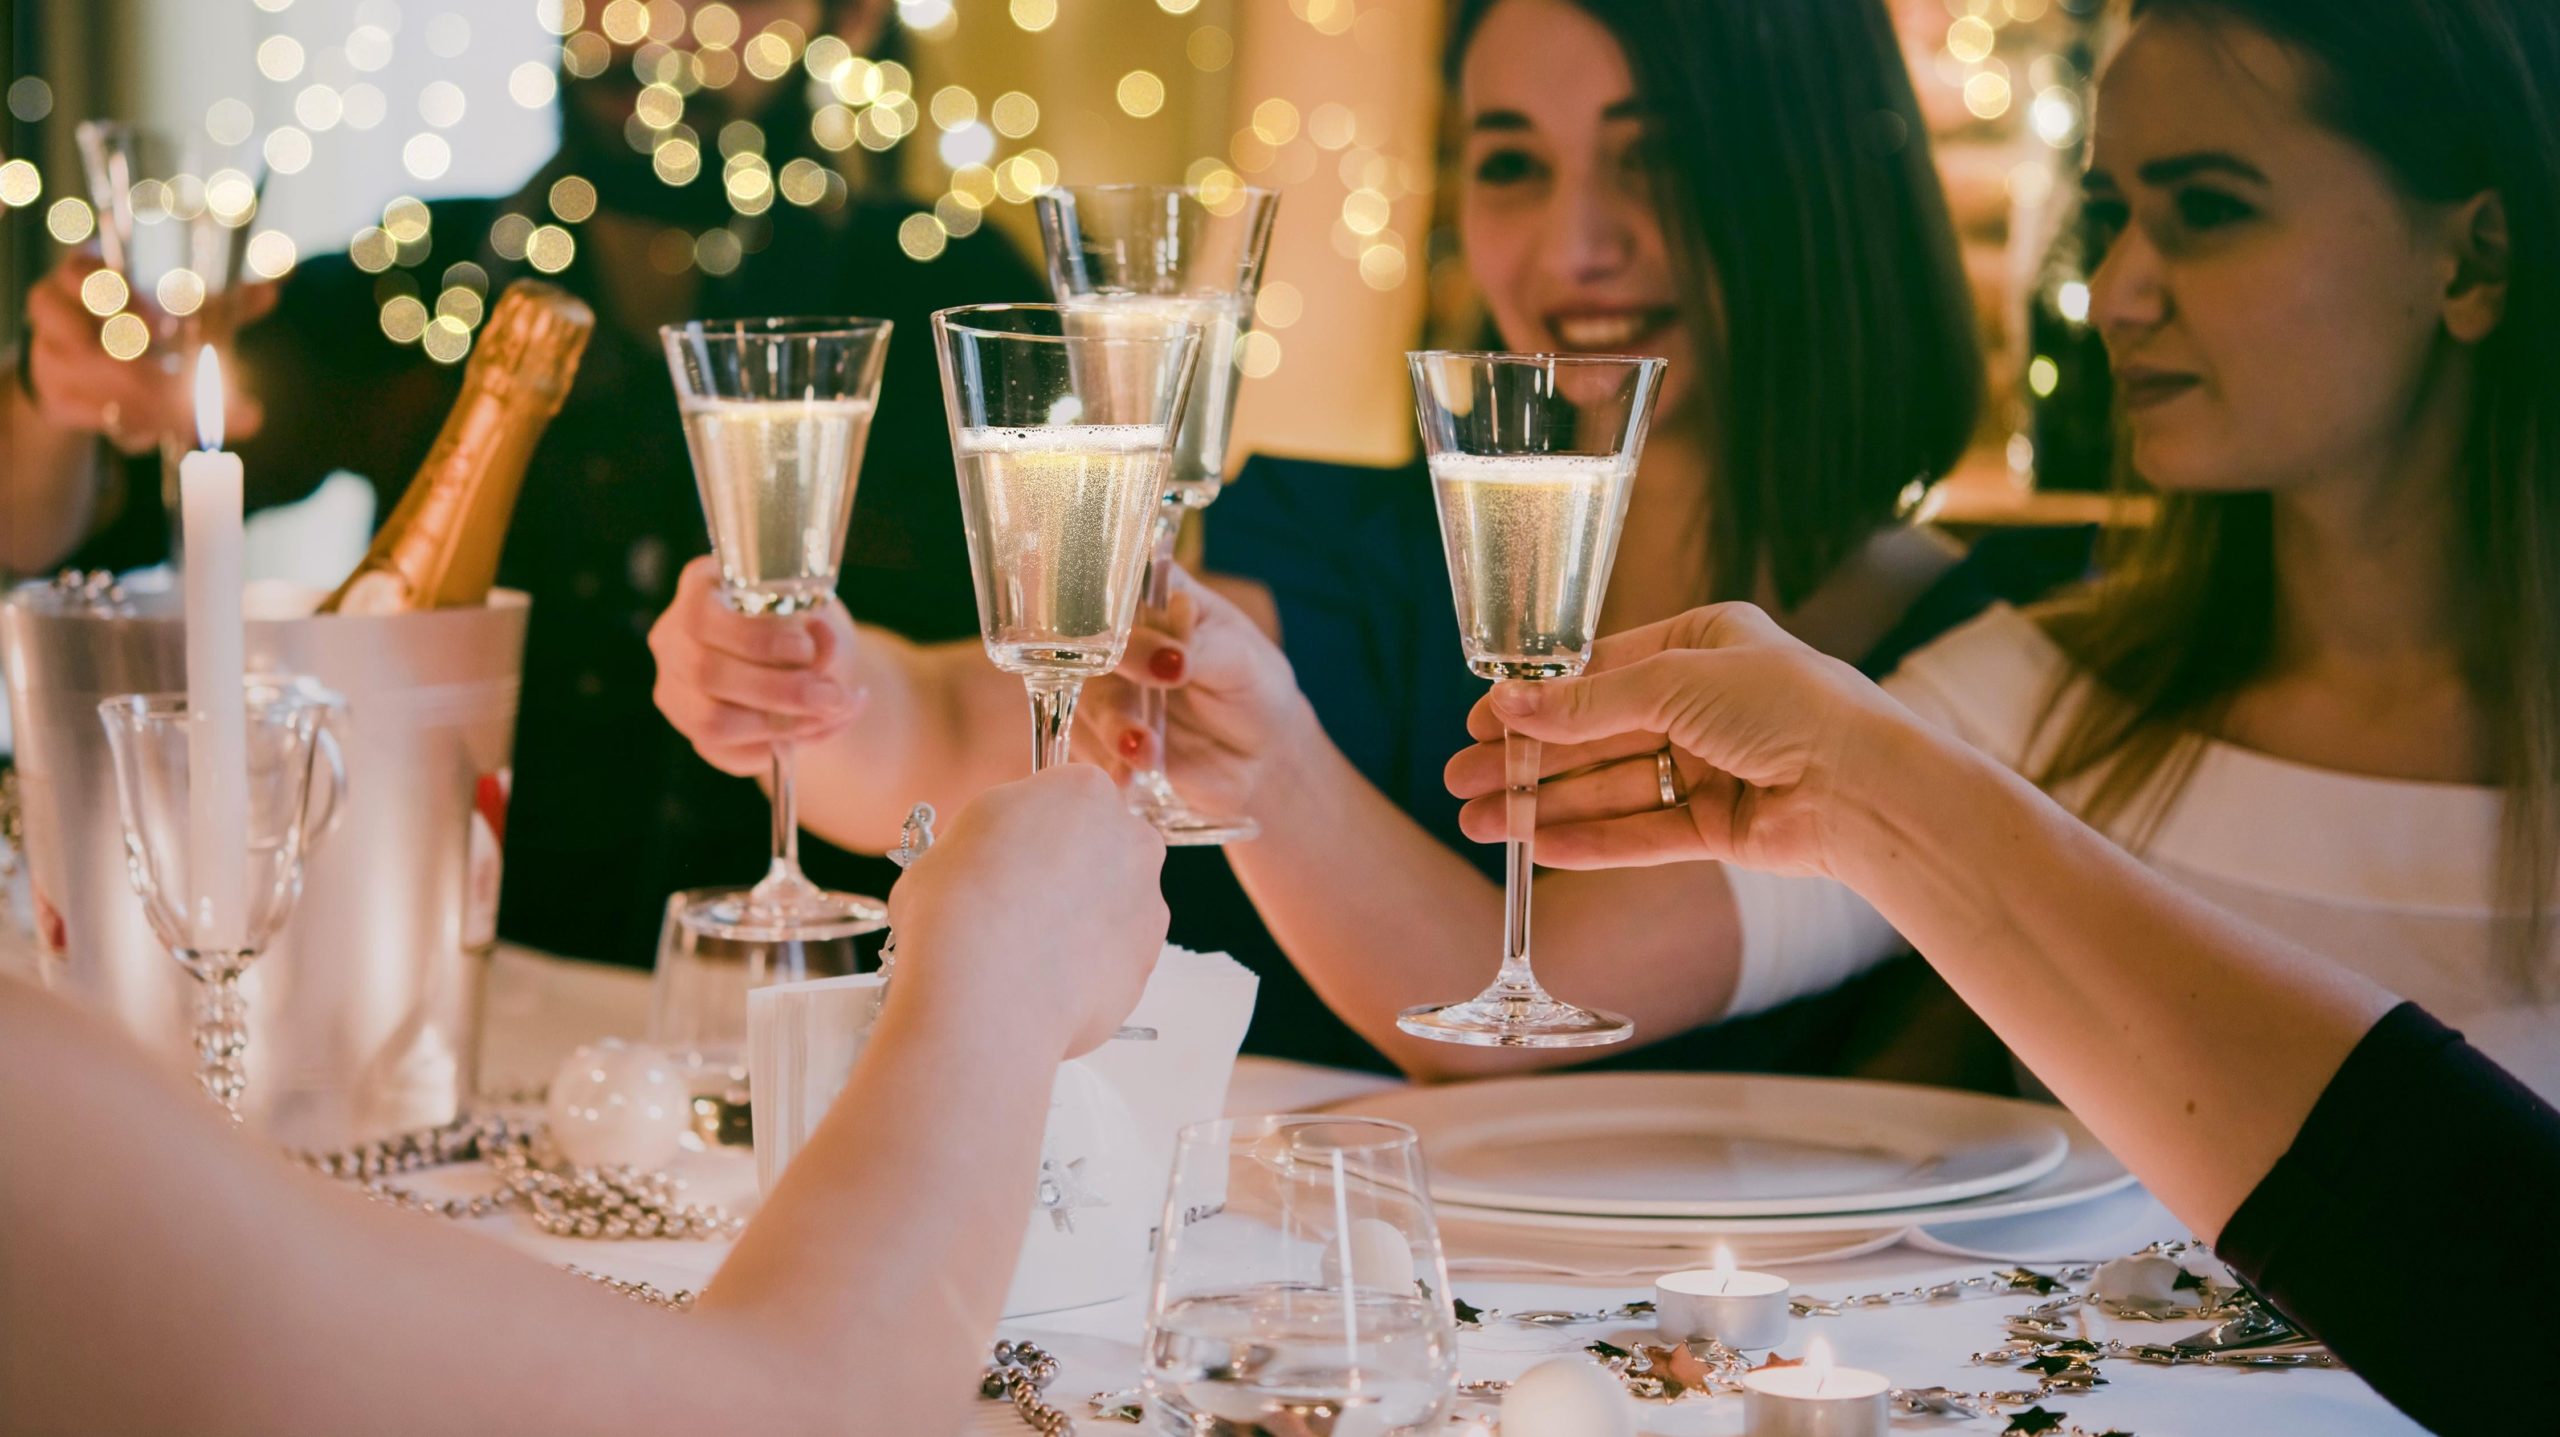 How to Leave a Holiday Party Early Without Being Rude